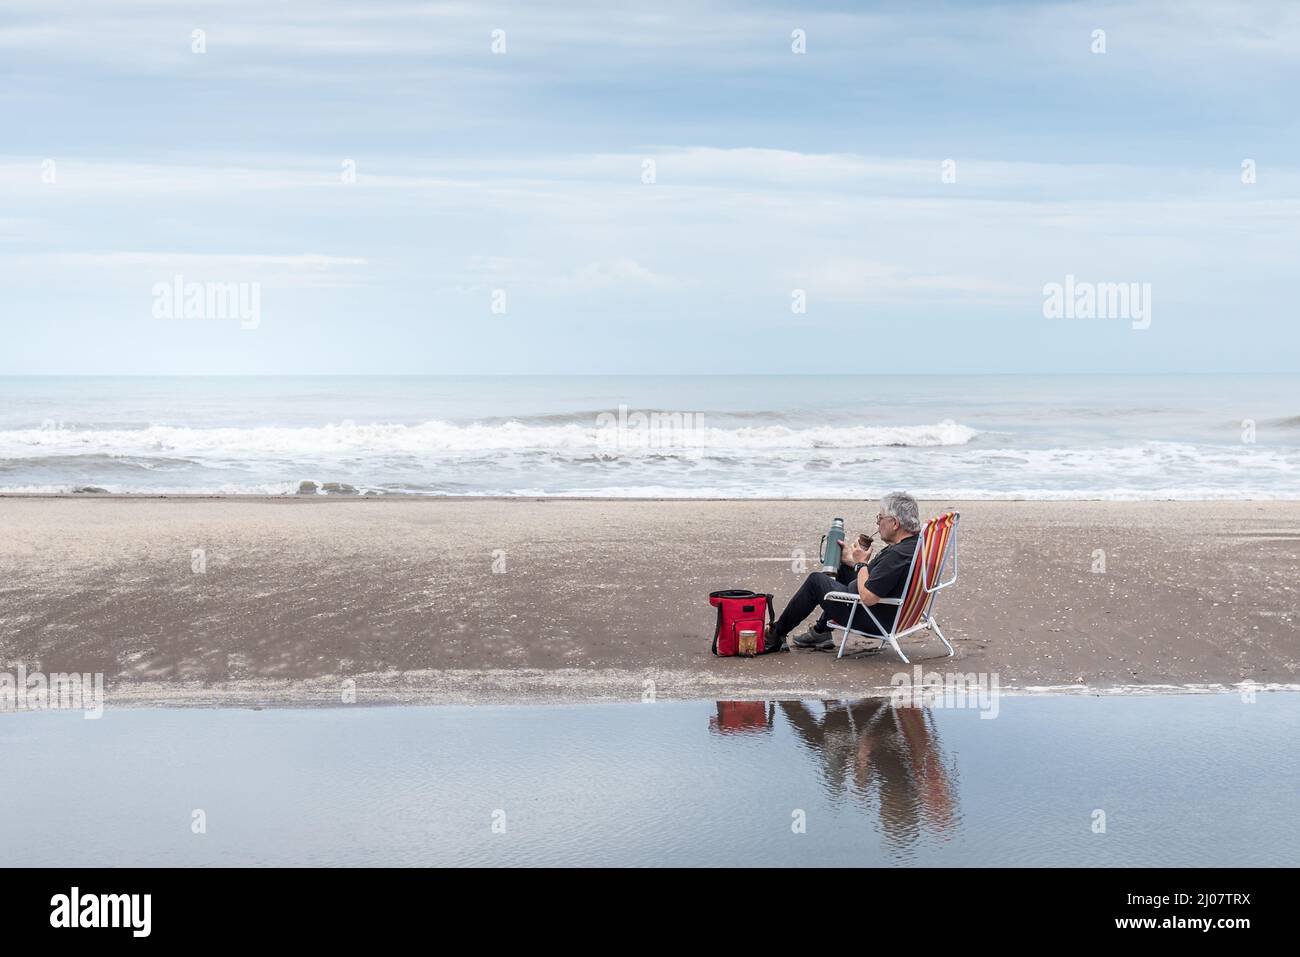 Mature man with gray hair and glasses sitting on a beach chair drinking mate all reflected in the water and in the background the waves of the sea. Stock Photo